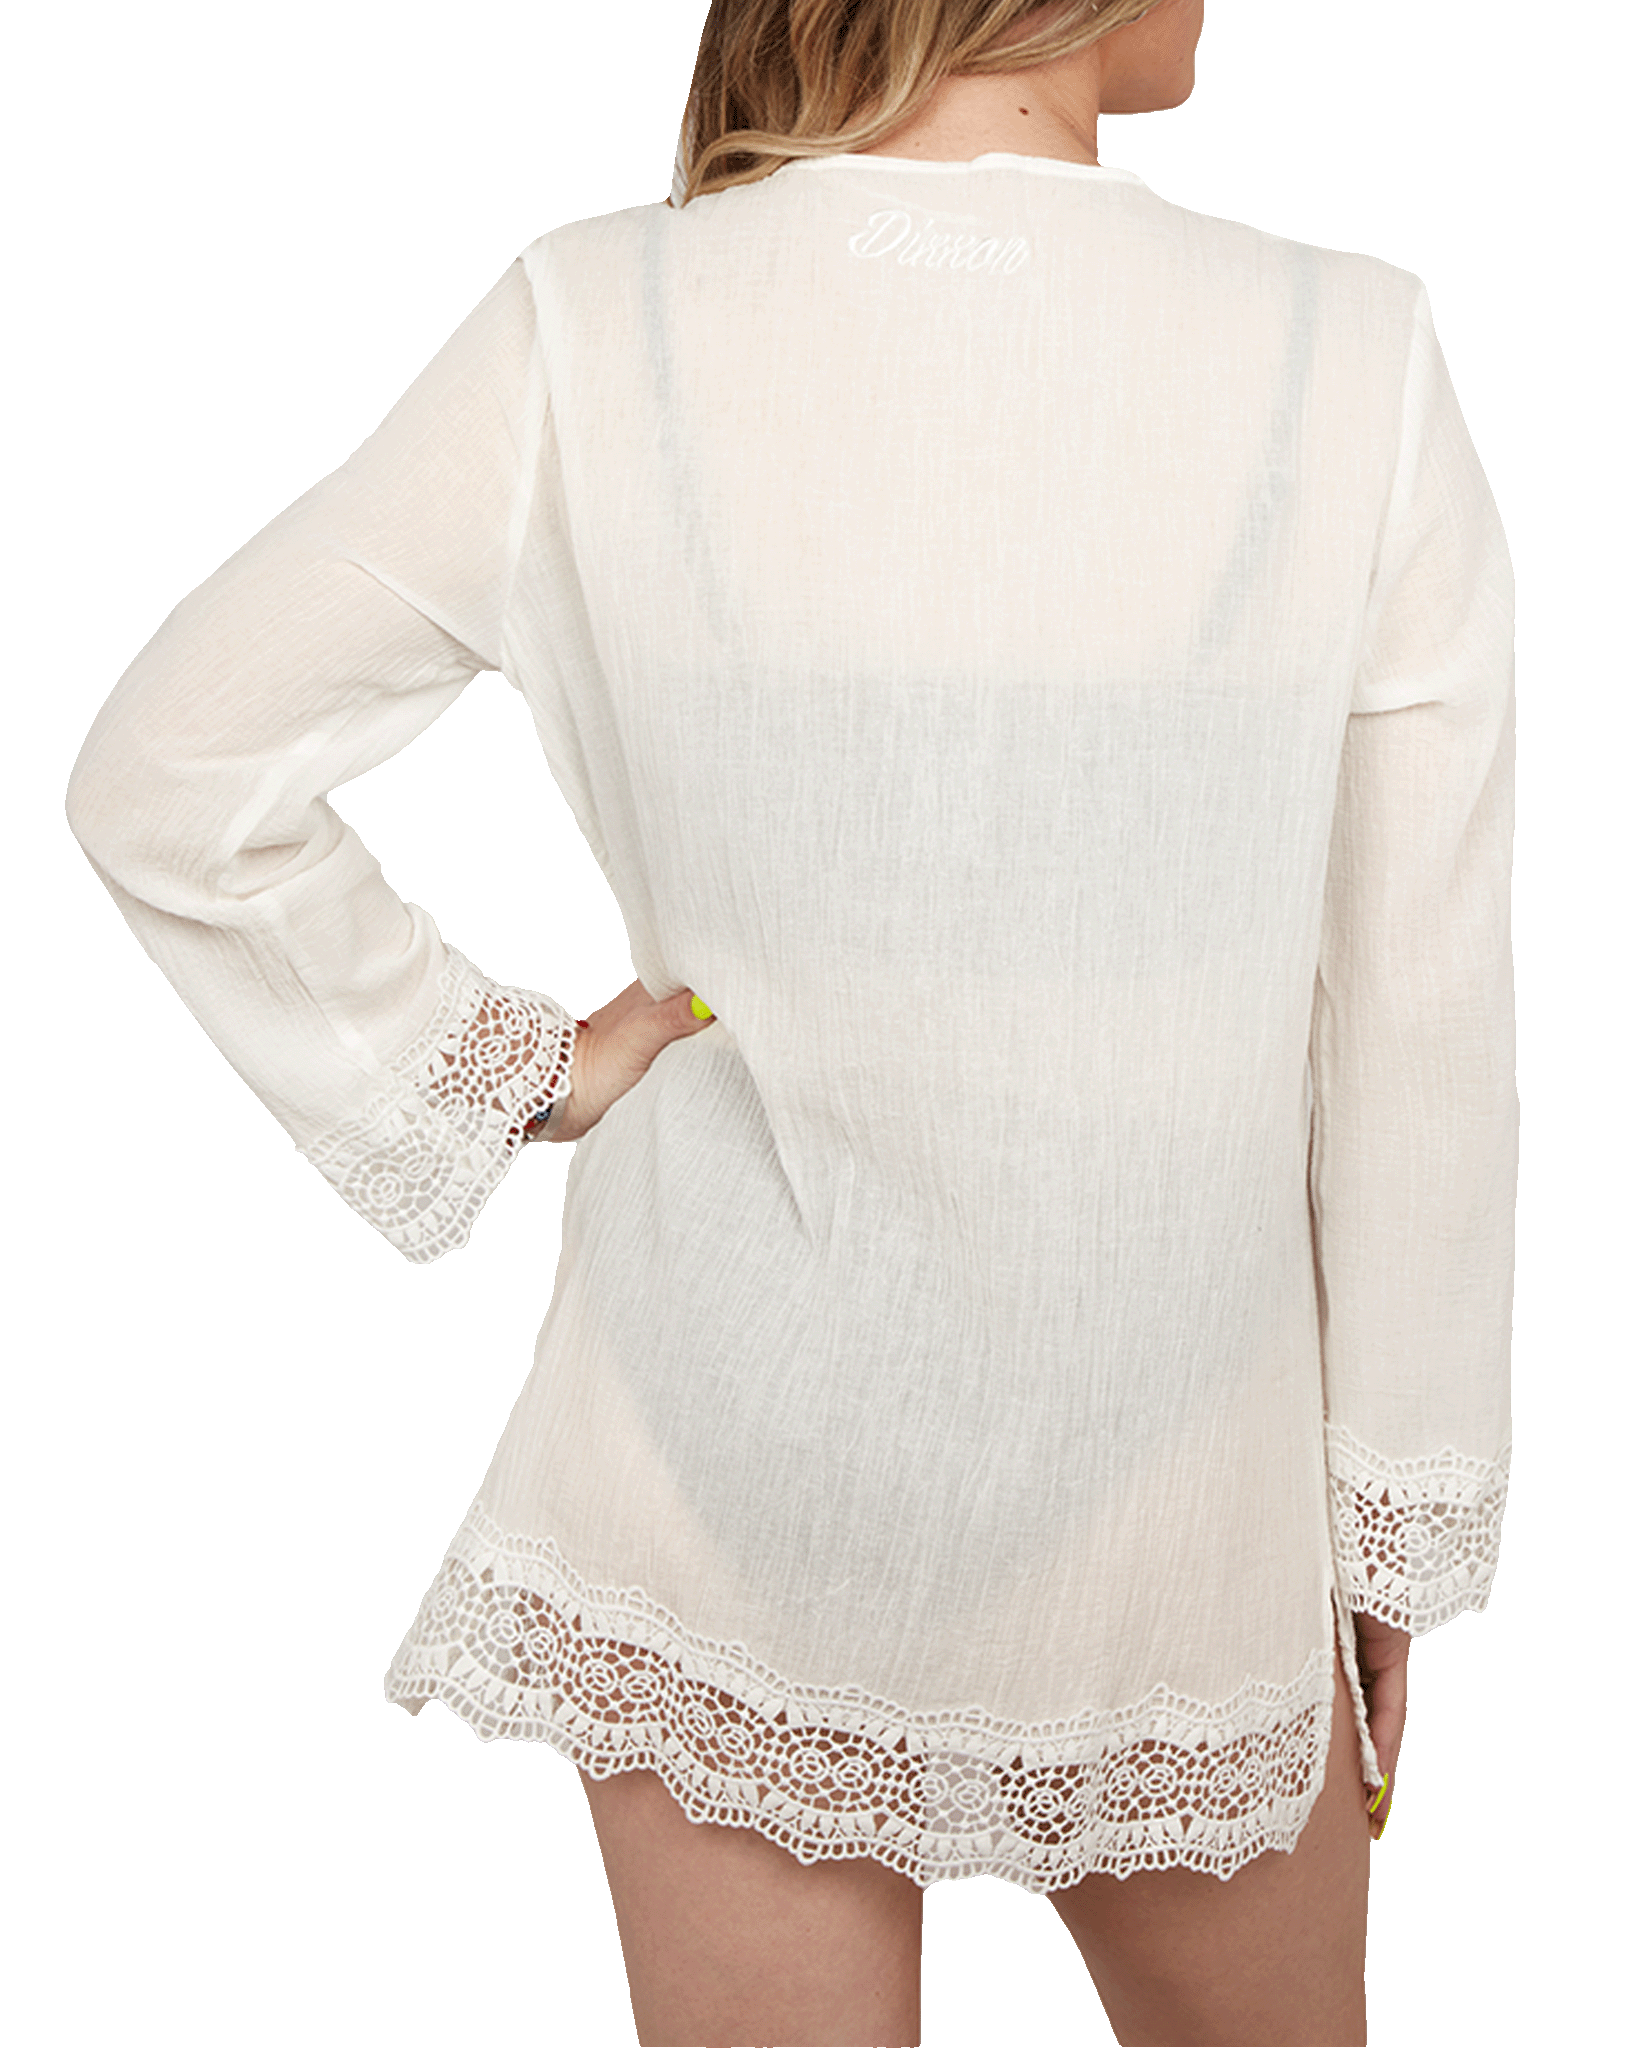 Pin on Women's Cover Ups White Lace